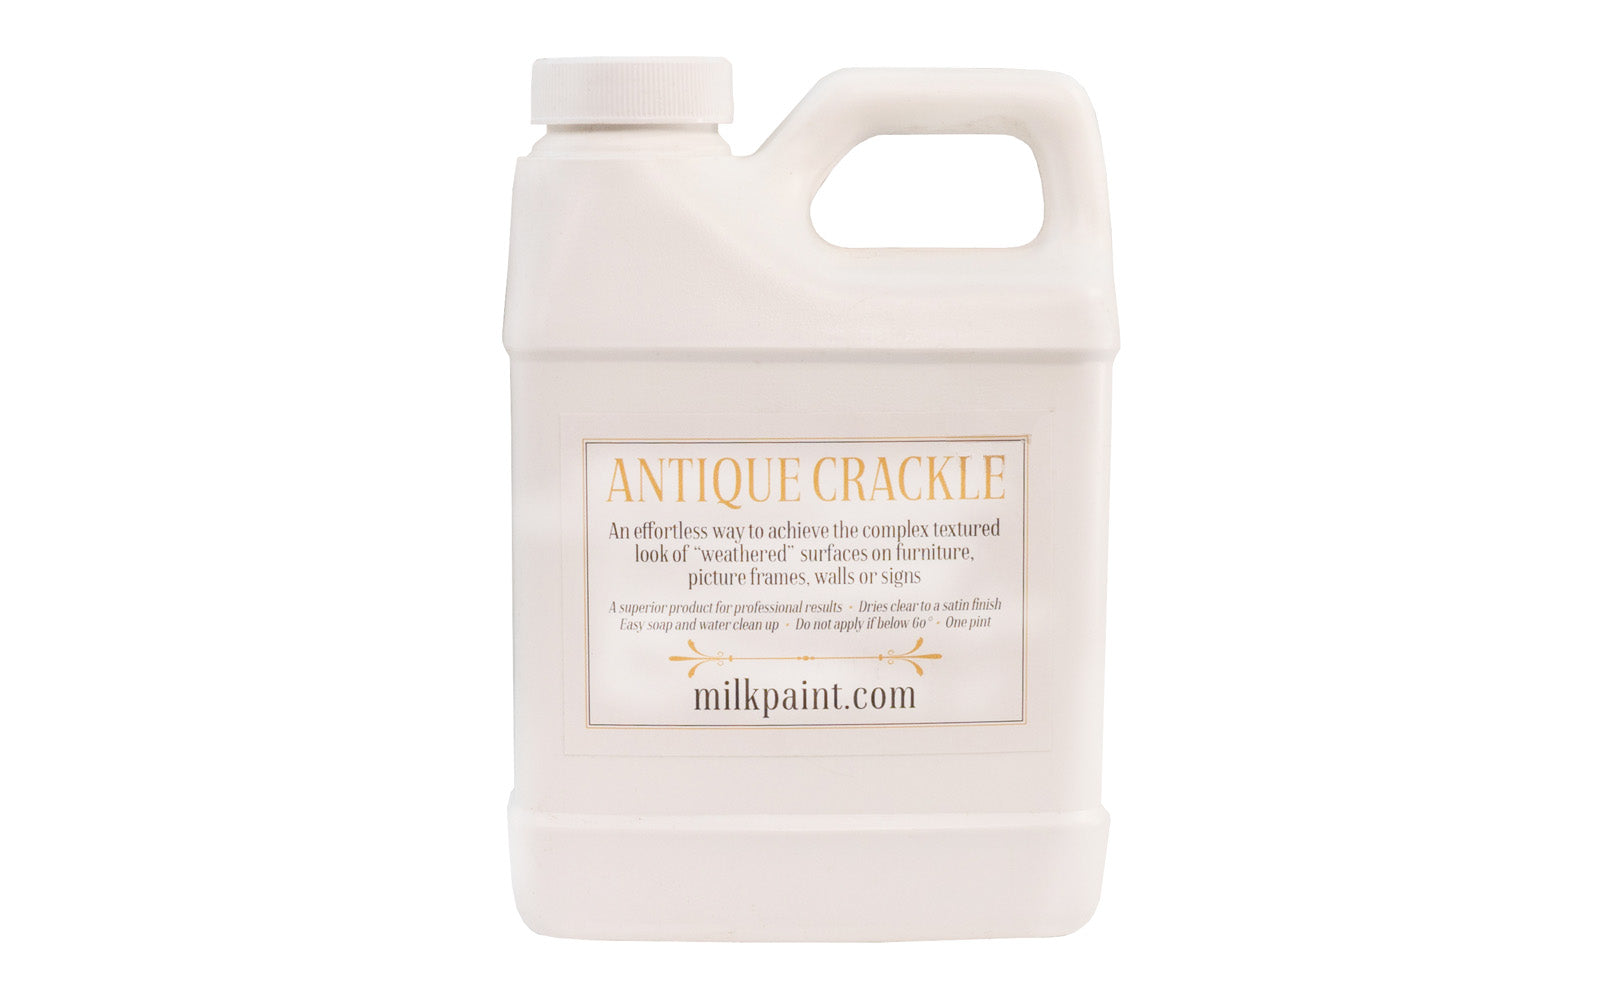 Antique crackle is designed to give a complex textured look of "weathered" surfaces on furniture, picture frames, walls, or signs. Dries to a clear satin finish. This natural gelatin product is brushed on before final coat of paint for an instant “alligator” or crackled look. Non-toxic. FDA approved mildewcide. Pint.